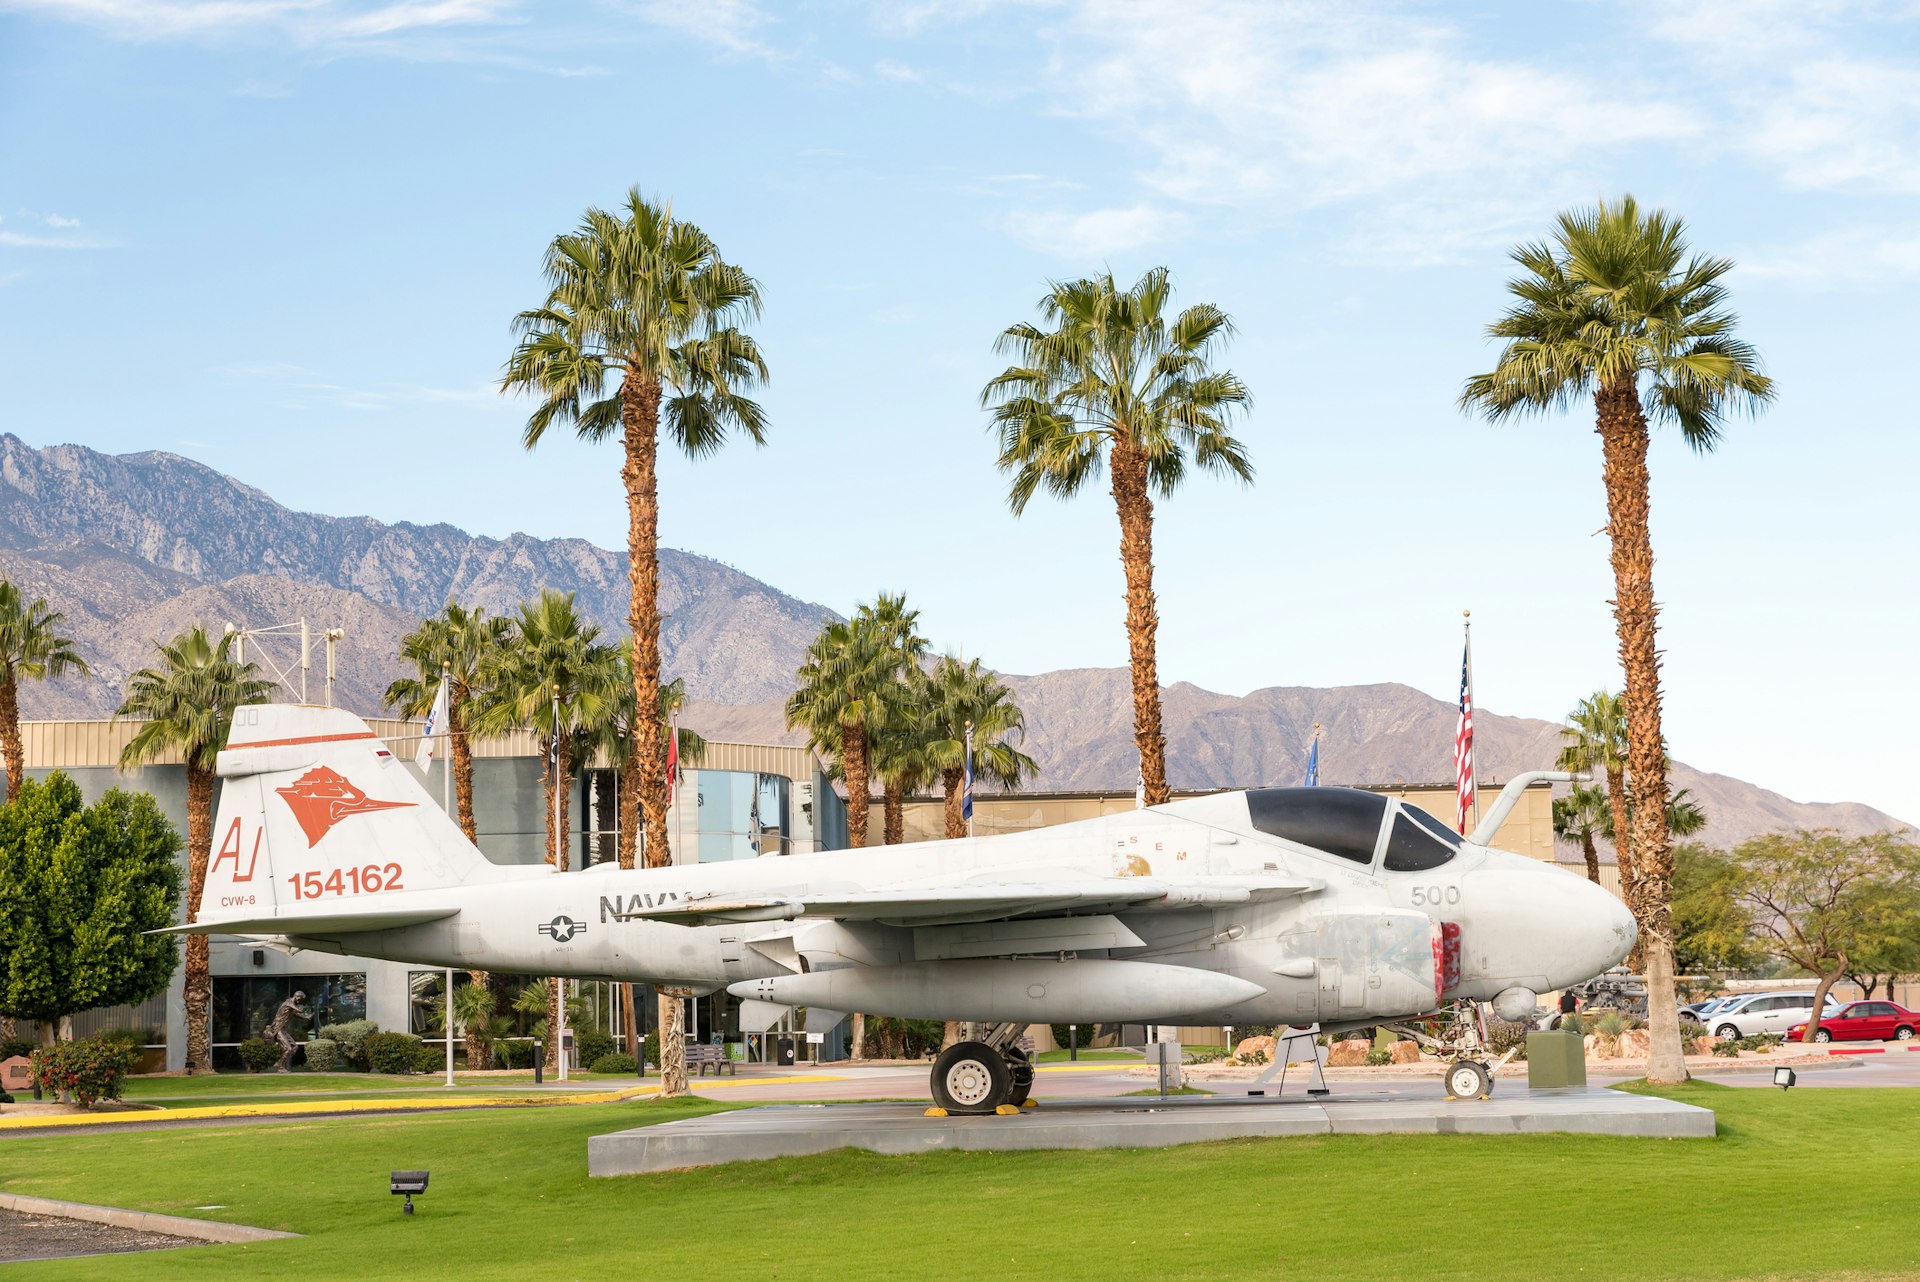 A small airplane standing in front of a museum building. Tall palm trees rise above it